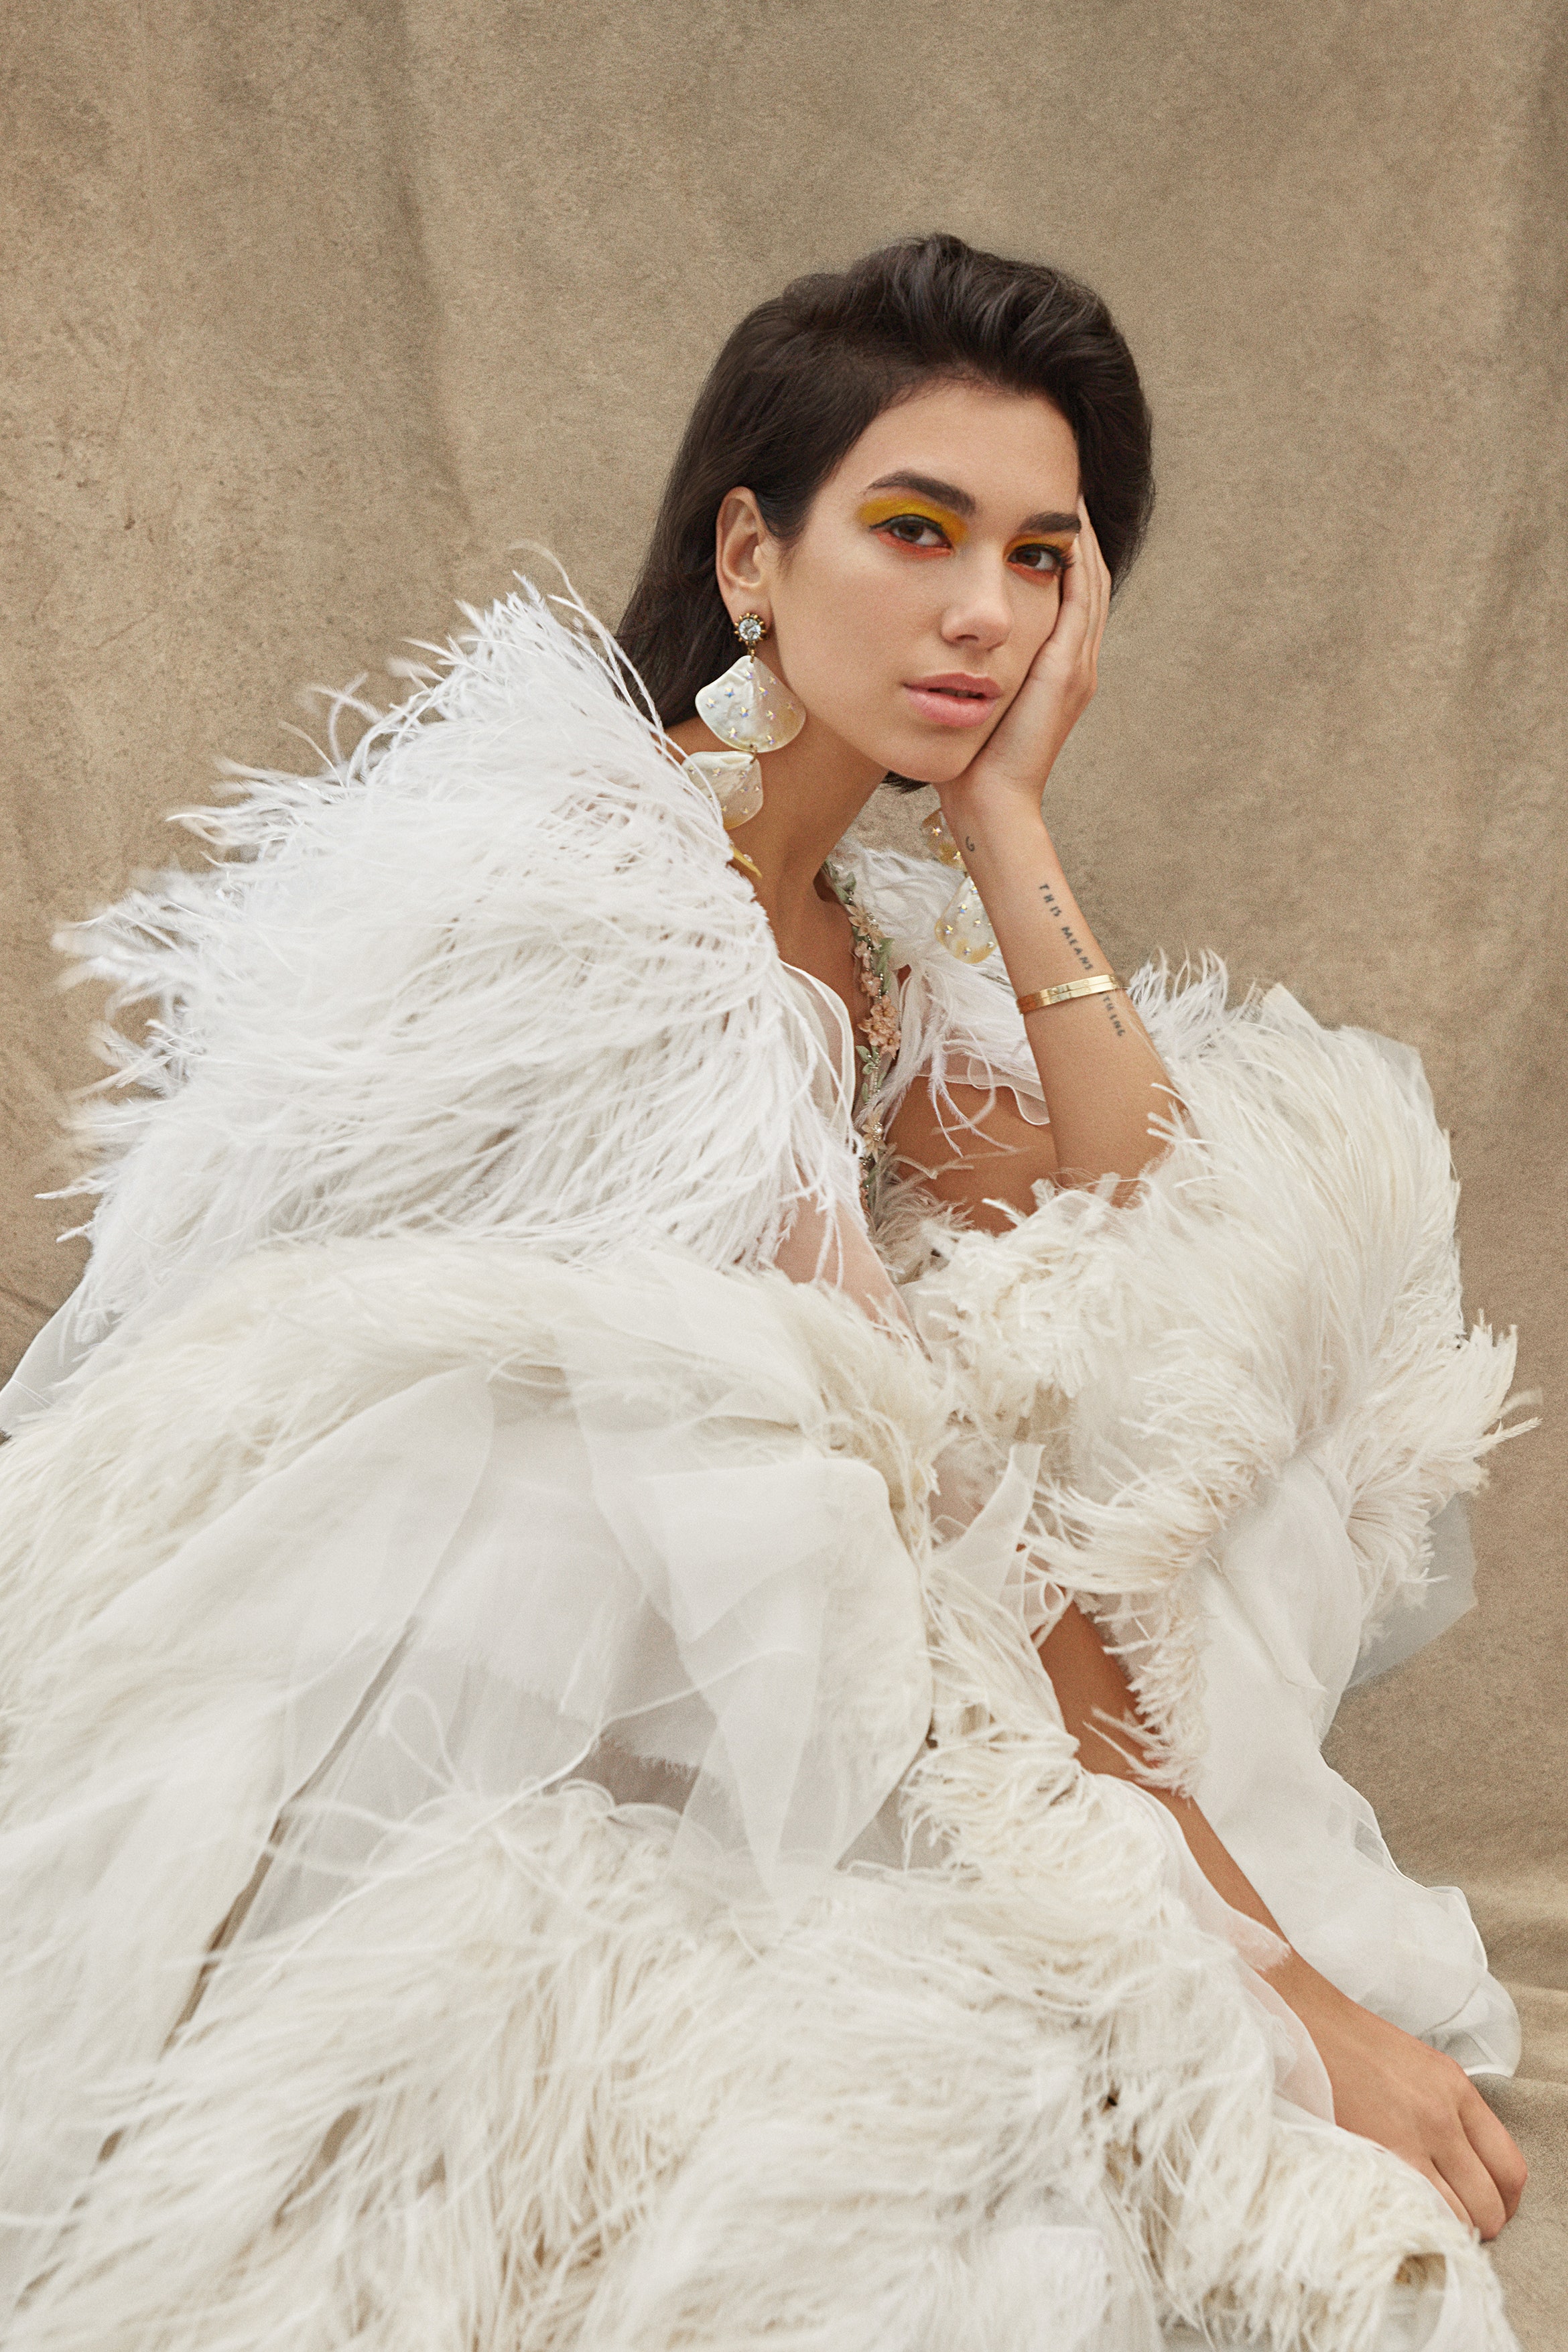 Youth Quake new generation of talents. Outdoor portrait of Dua Lipa wearing a cream dress feathers oversized shell drop...